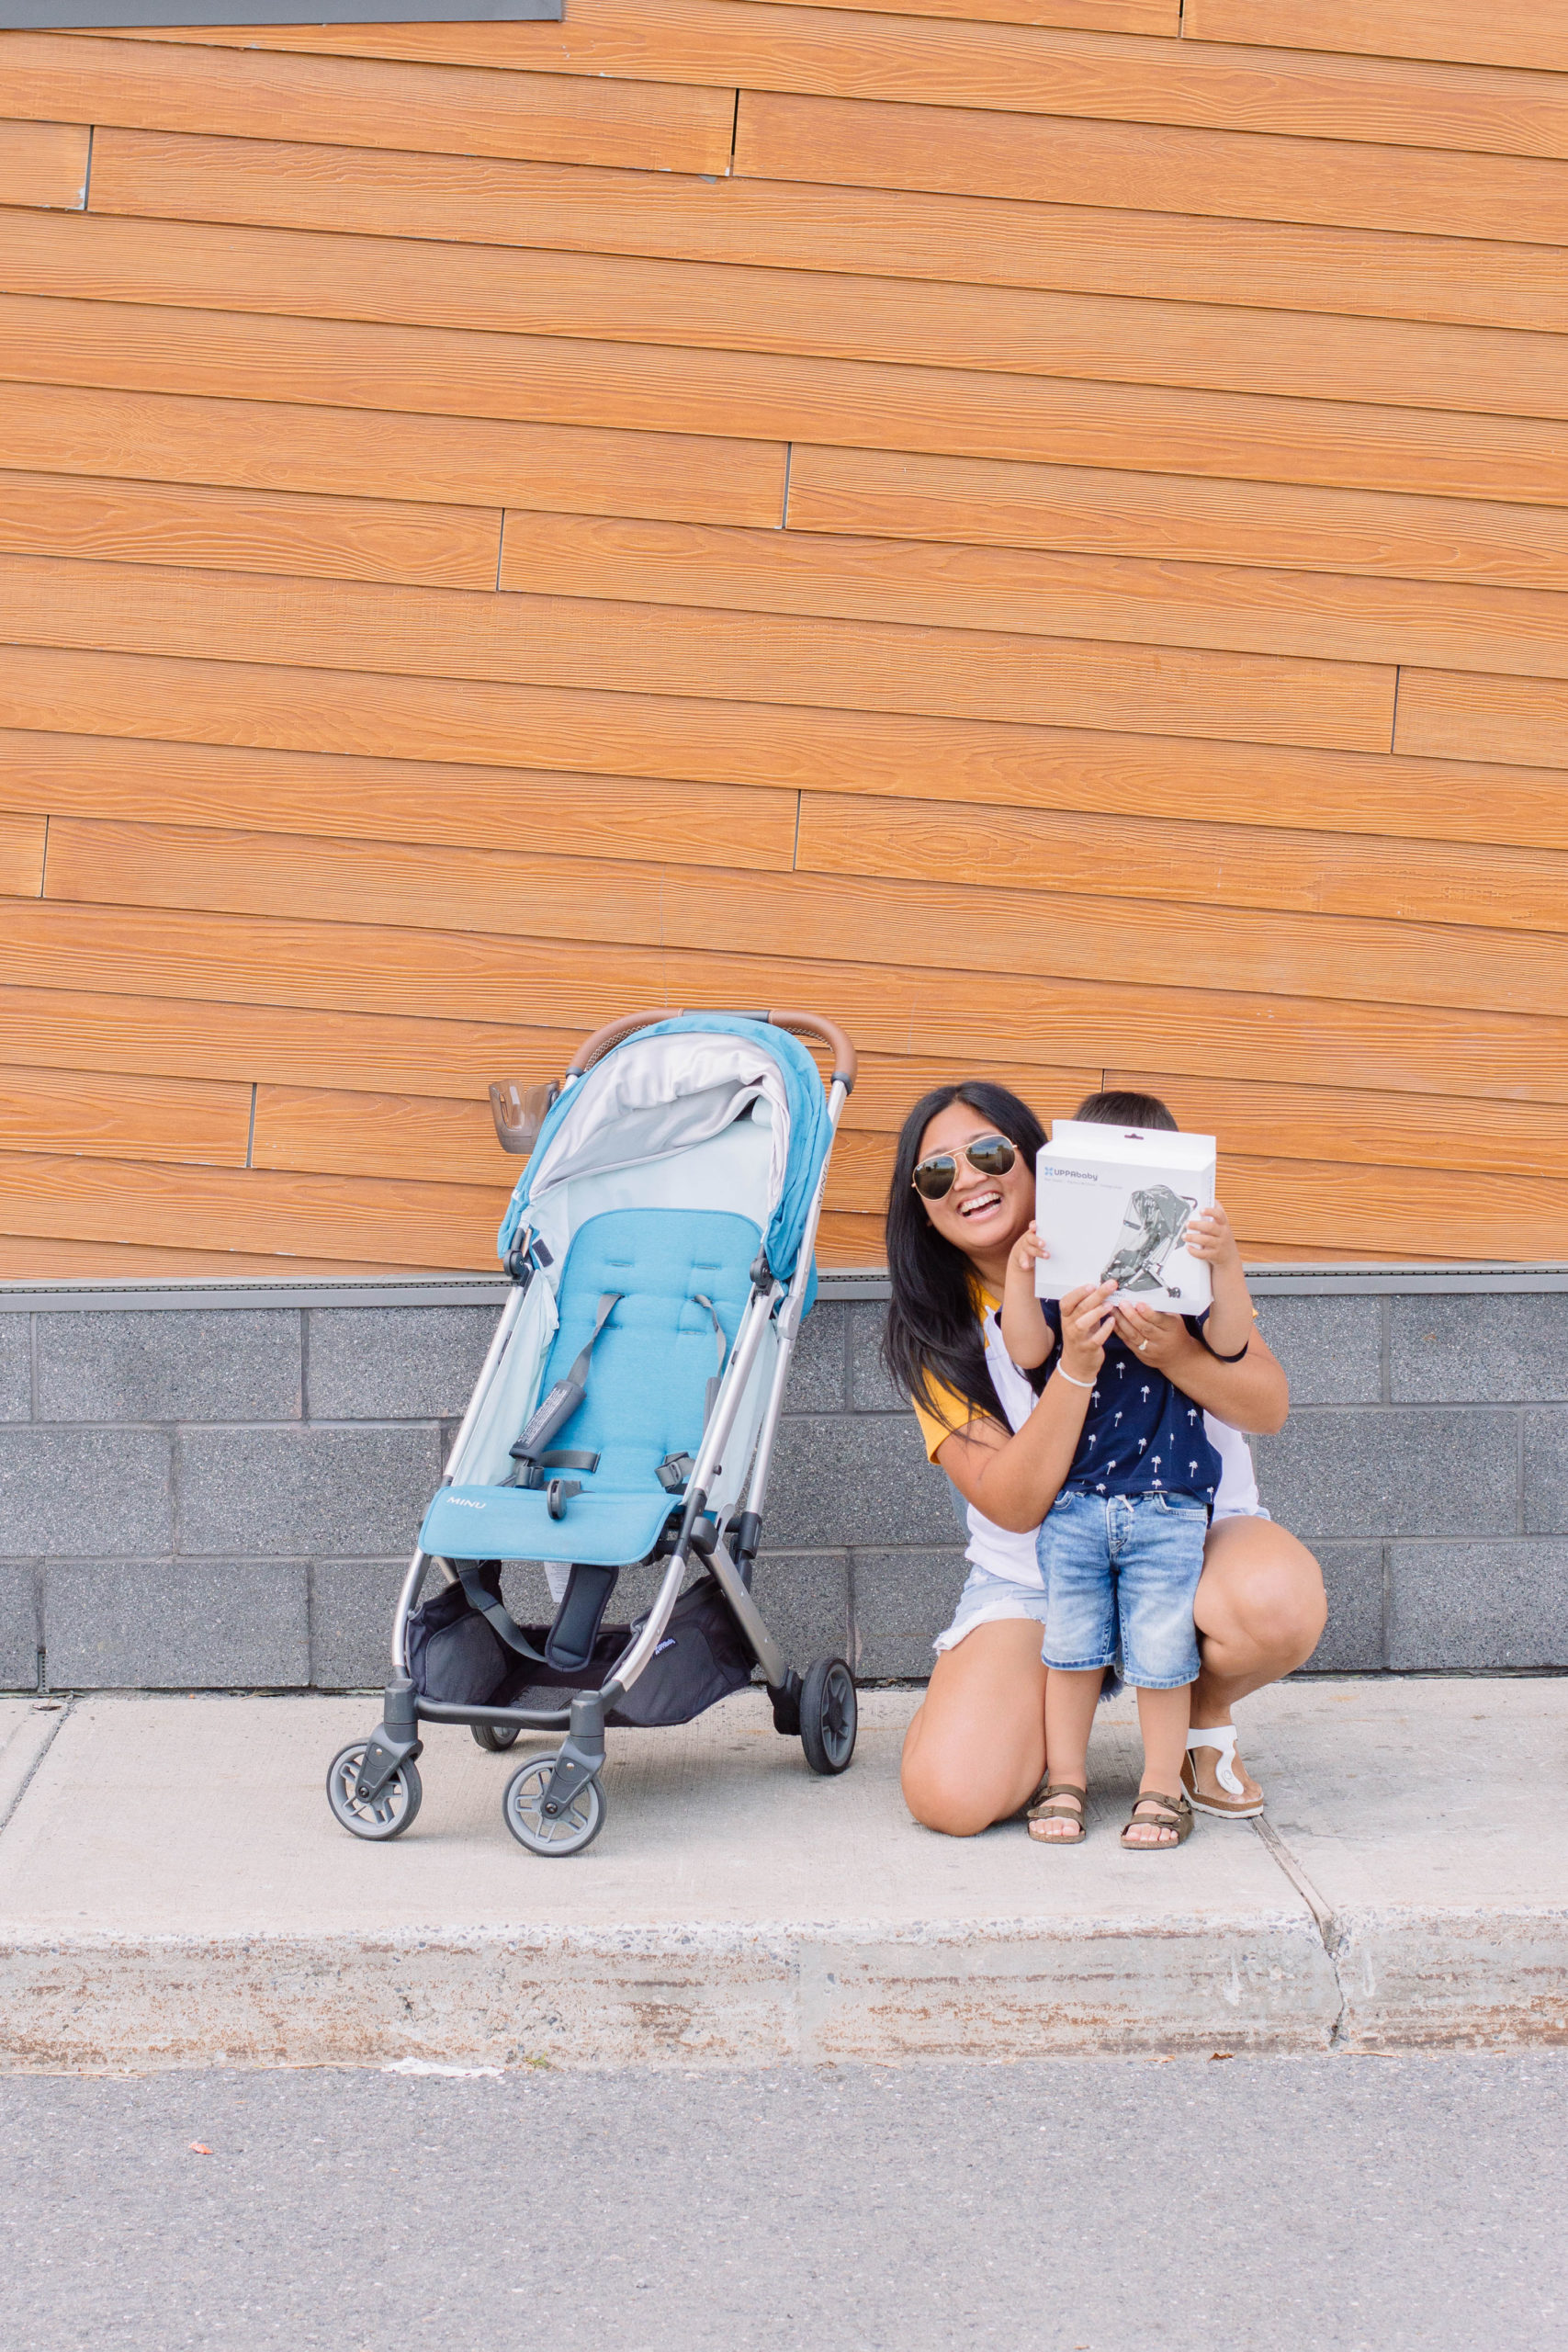 We love our UPPAbaby MINU stroller and today, we're sharing our favorite accessories to go along with it! #UPPAbaby #UPPAbabyMINU